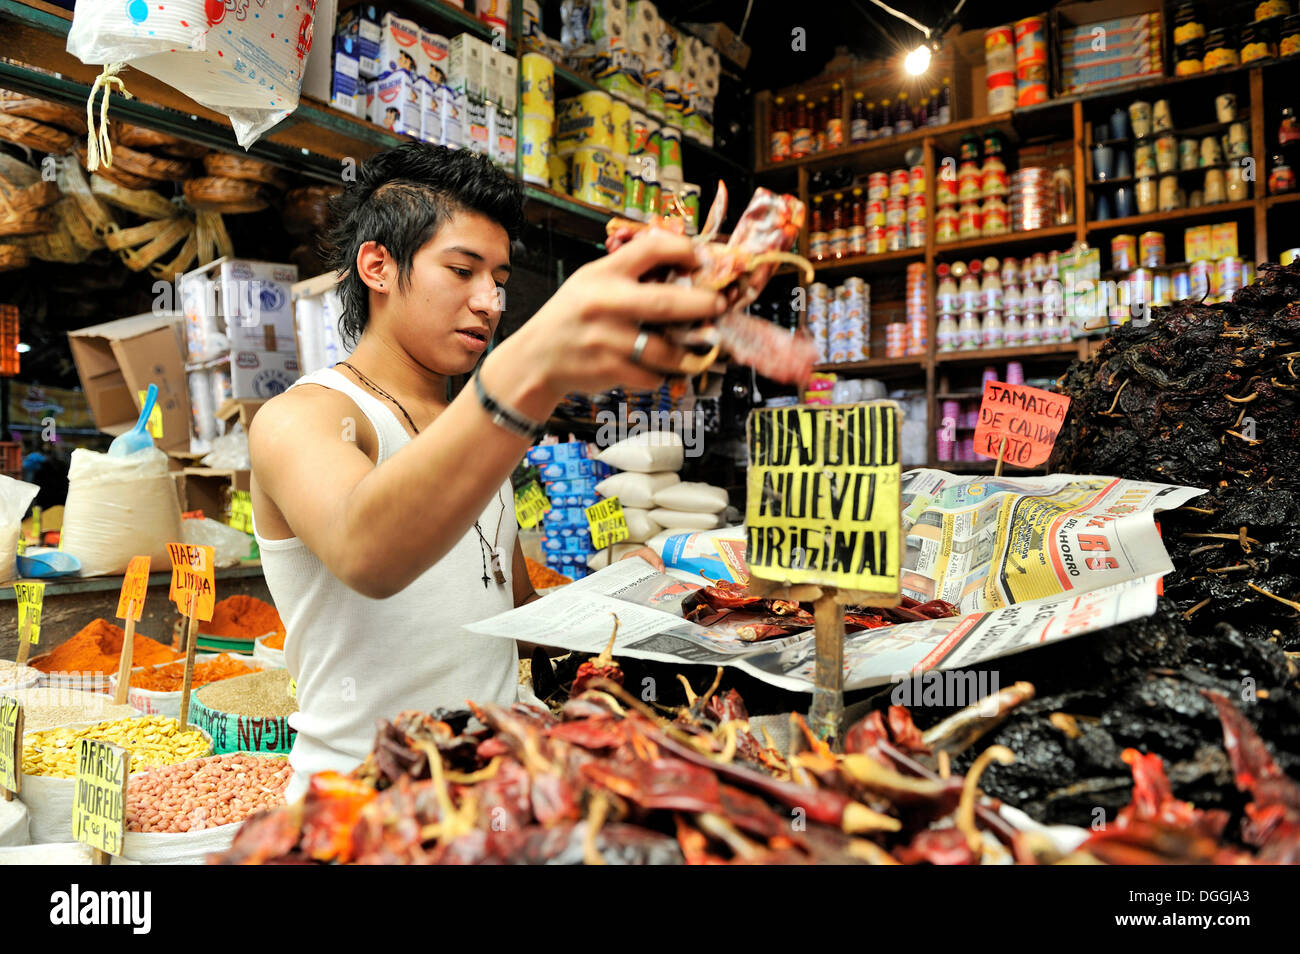 Youth selling spices and other ingredients in his market stall, packaging of chili peppers, urban markets of Puebla, Mexico Stock Photo